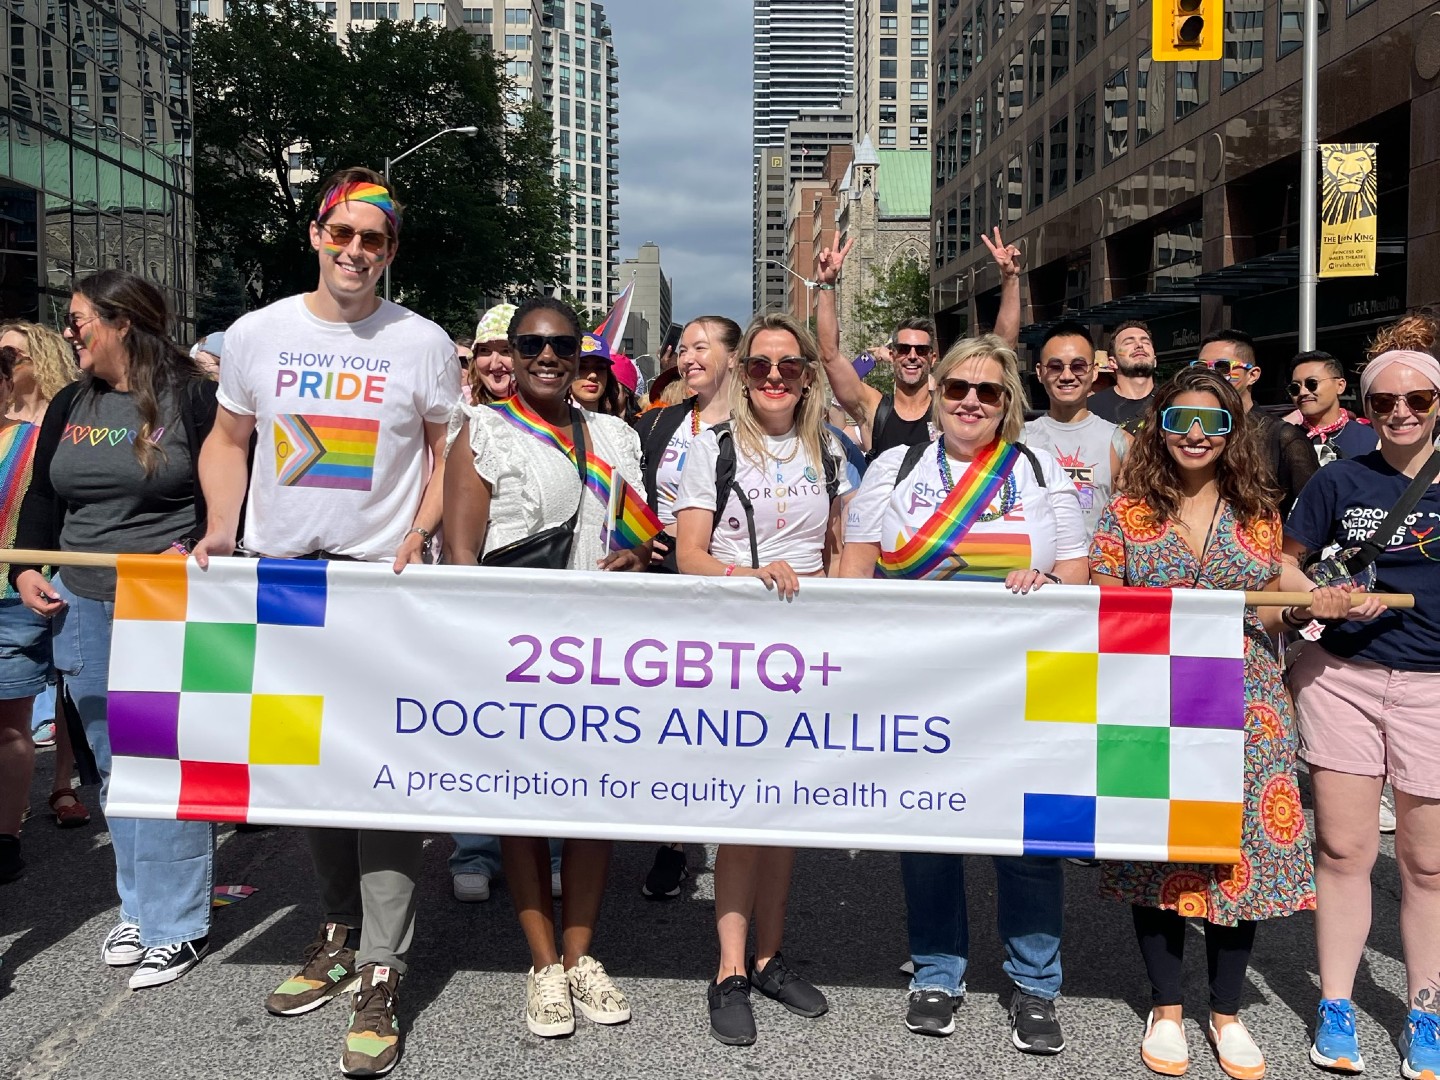 A group of people wearing Pride shirts stand in the middle of a street in downtown Toronto holding a sign that reads, “2SLGBTQ+ DOCTORS AND ALLIES, A prescription for equity in health care.”